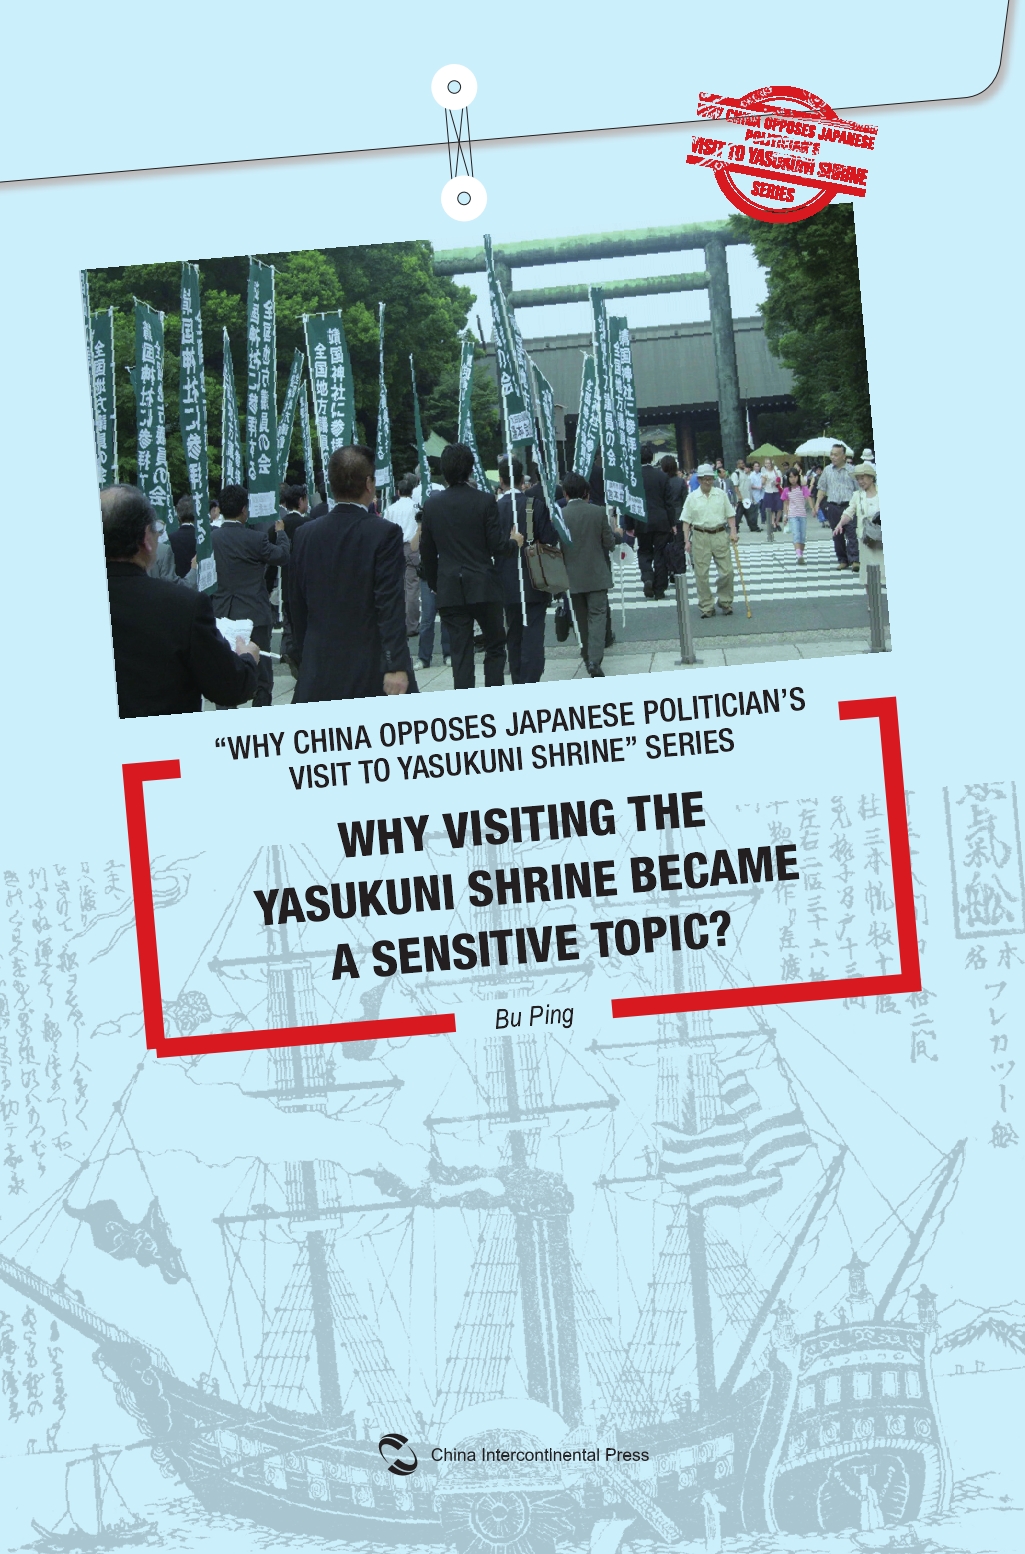 Why Visiting the Yasukuni Shrine Became A Sensitive Topic?